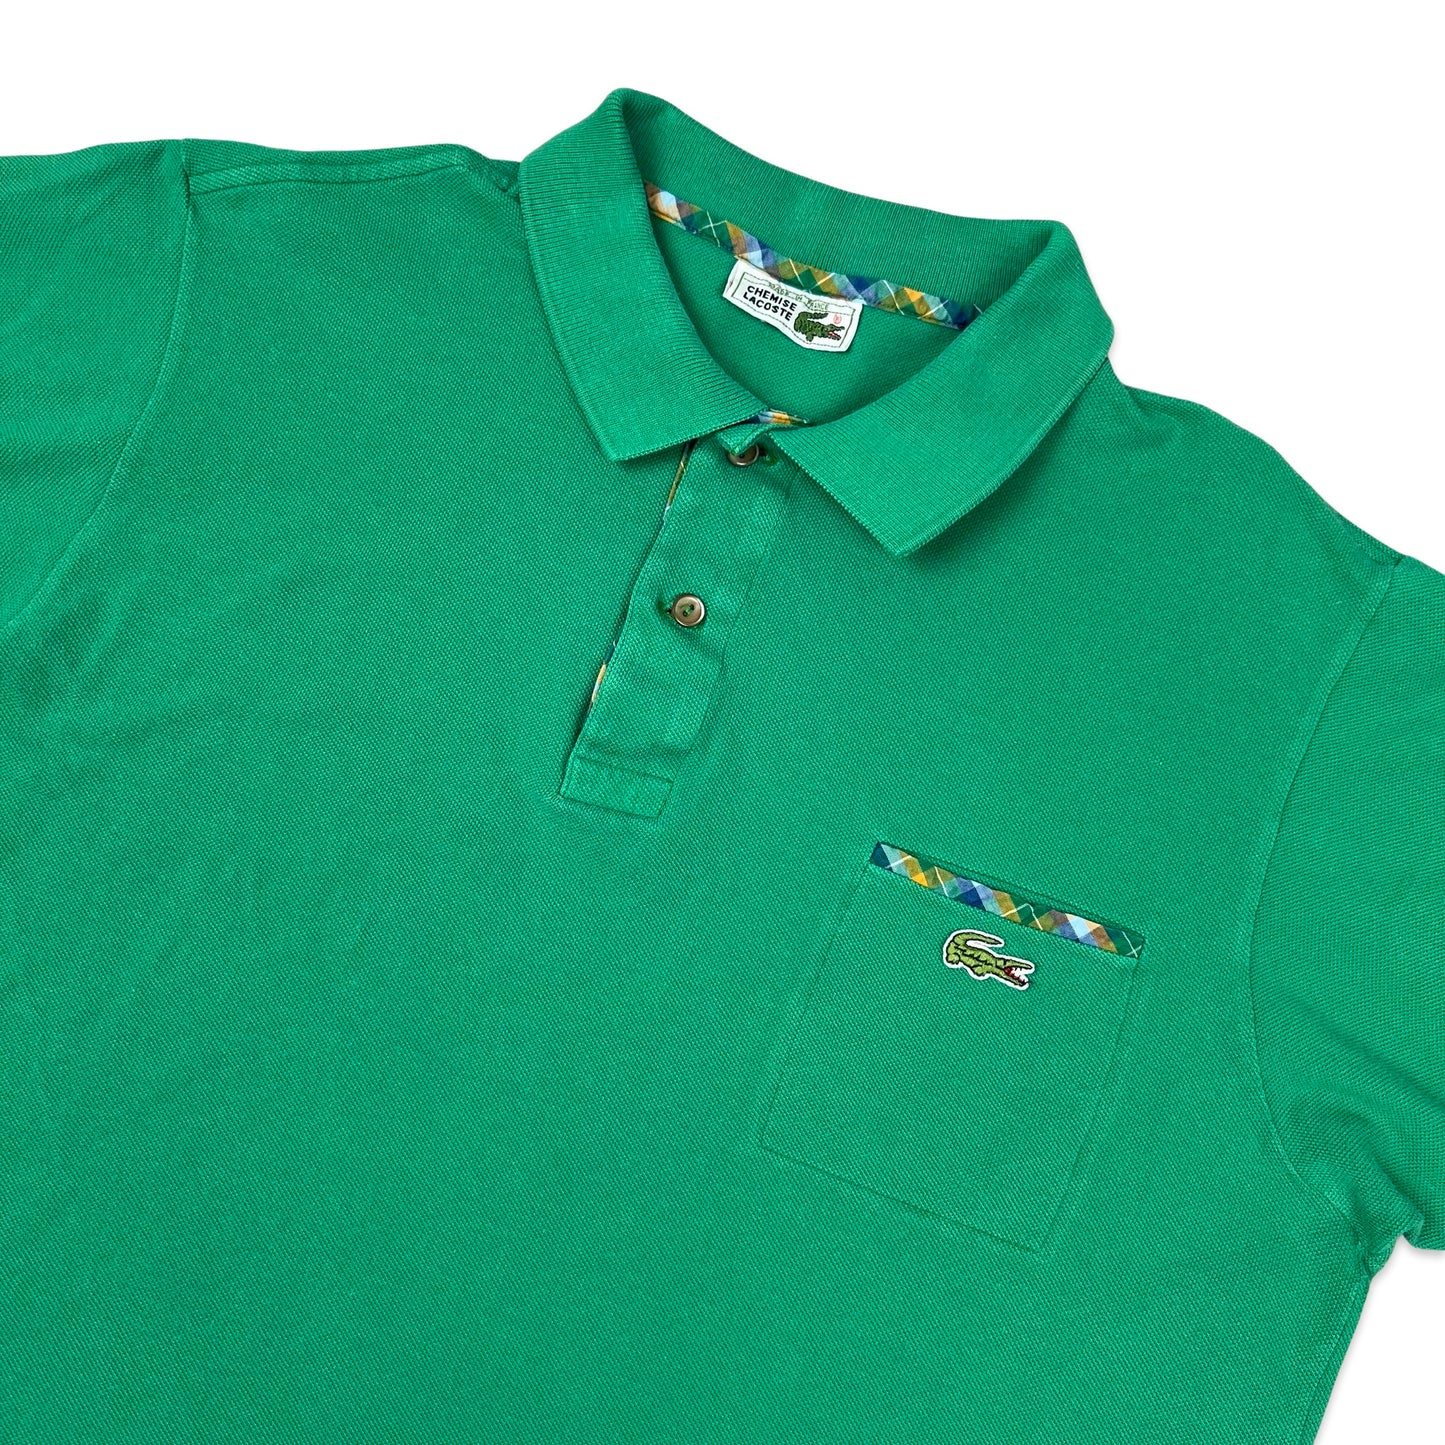 Vintage 80s Chemise Lacoste Green Polo Shirt S M